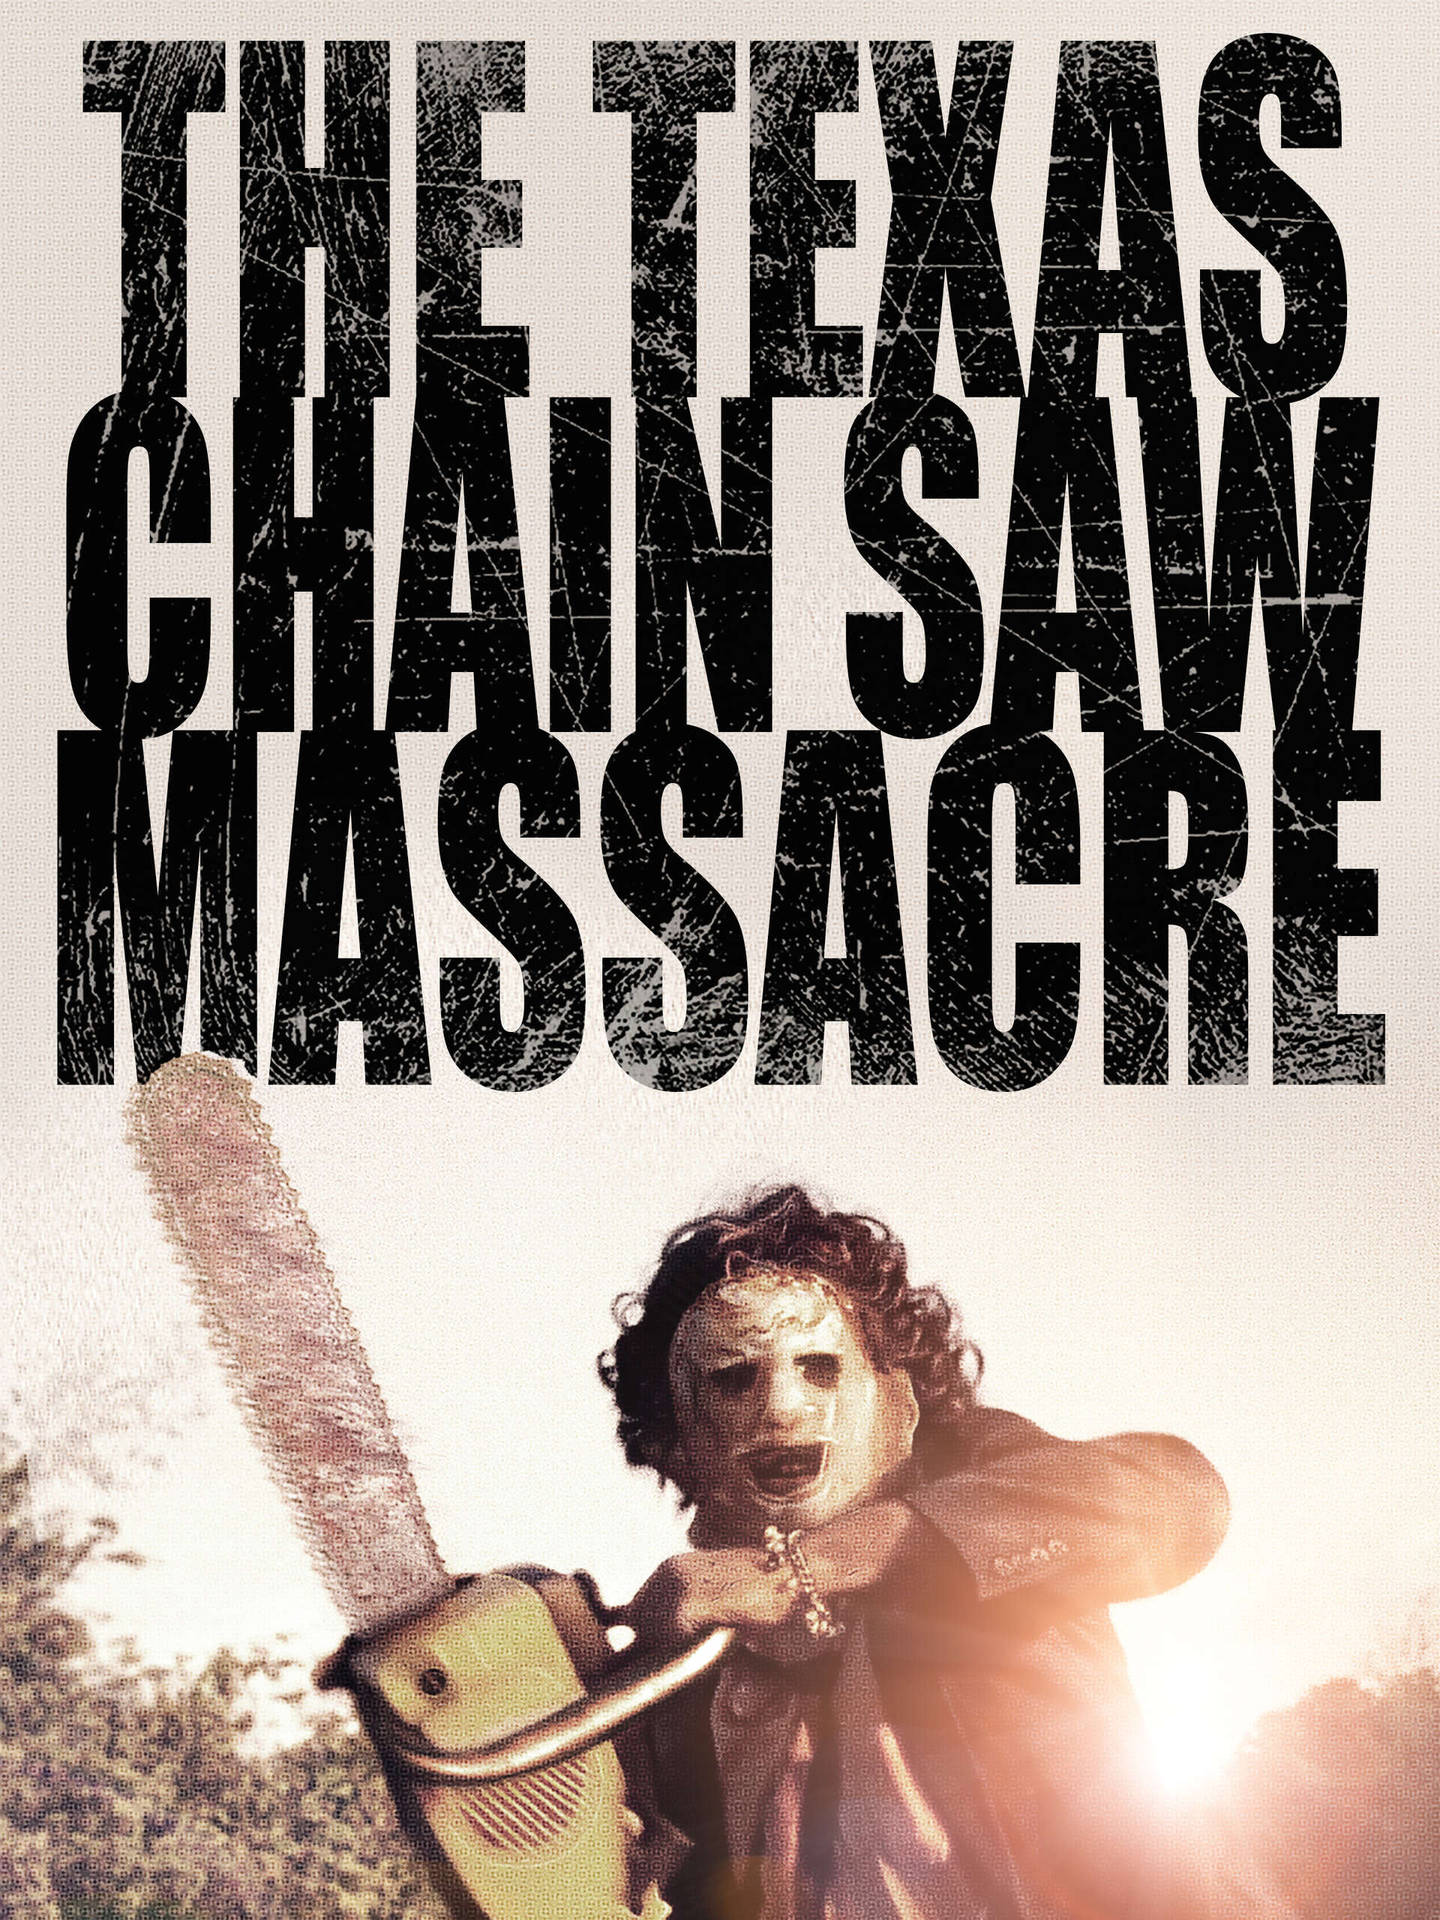 Leatherface Texas Chainsaw Massacre Poster Wallpaper